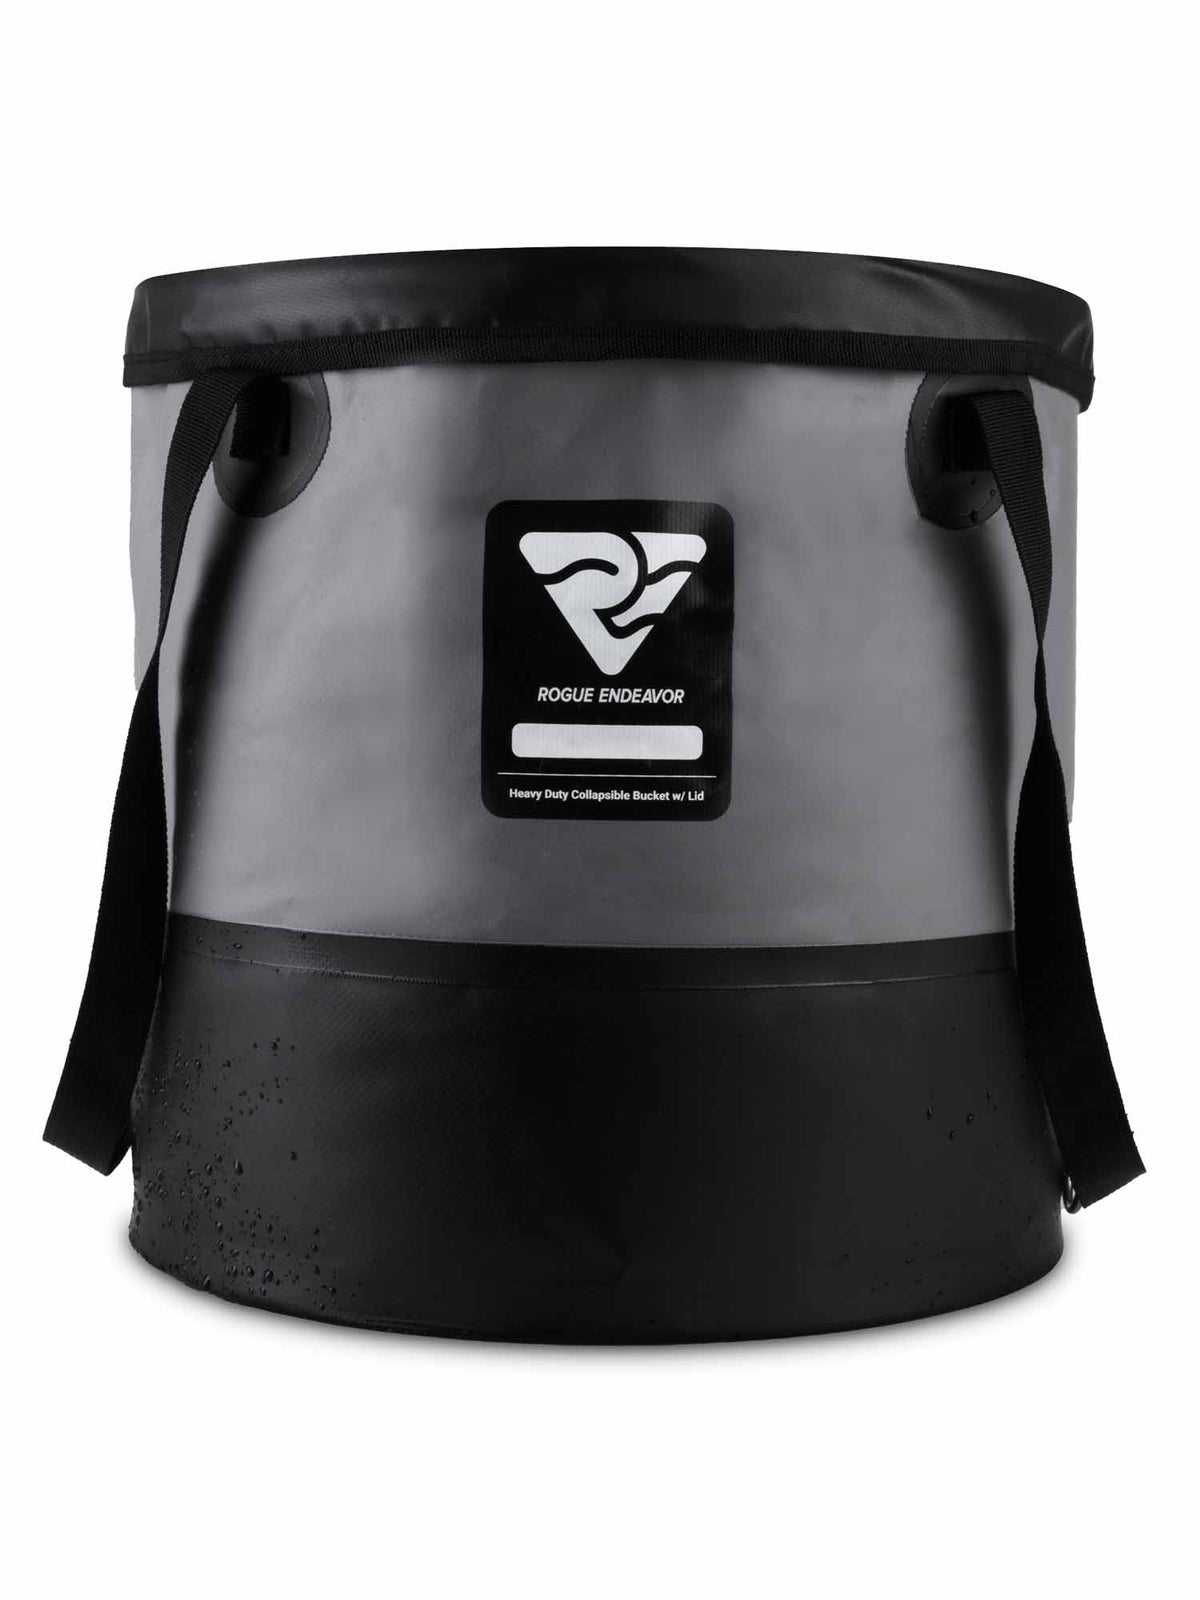 RV Collapsible Bucket #42993